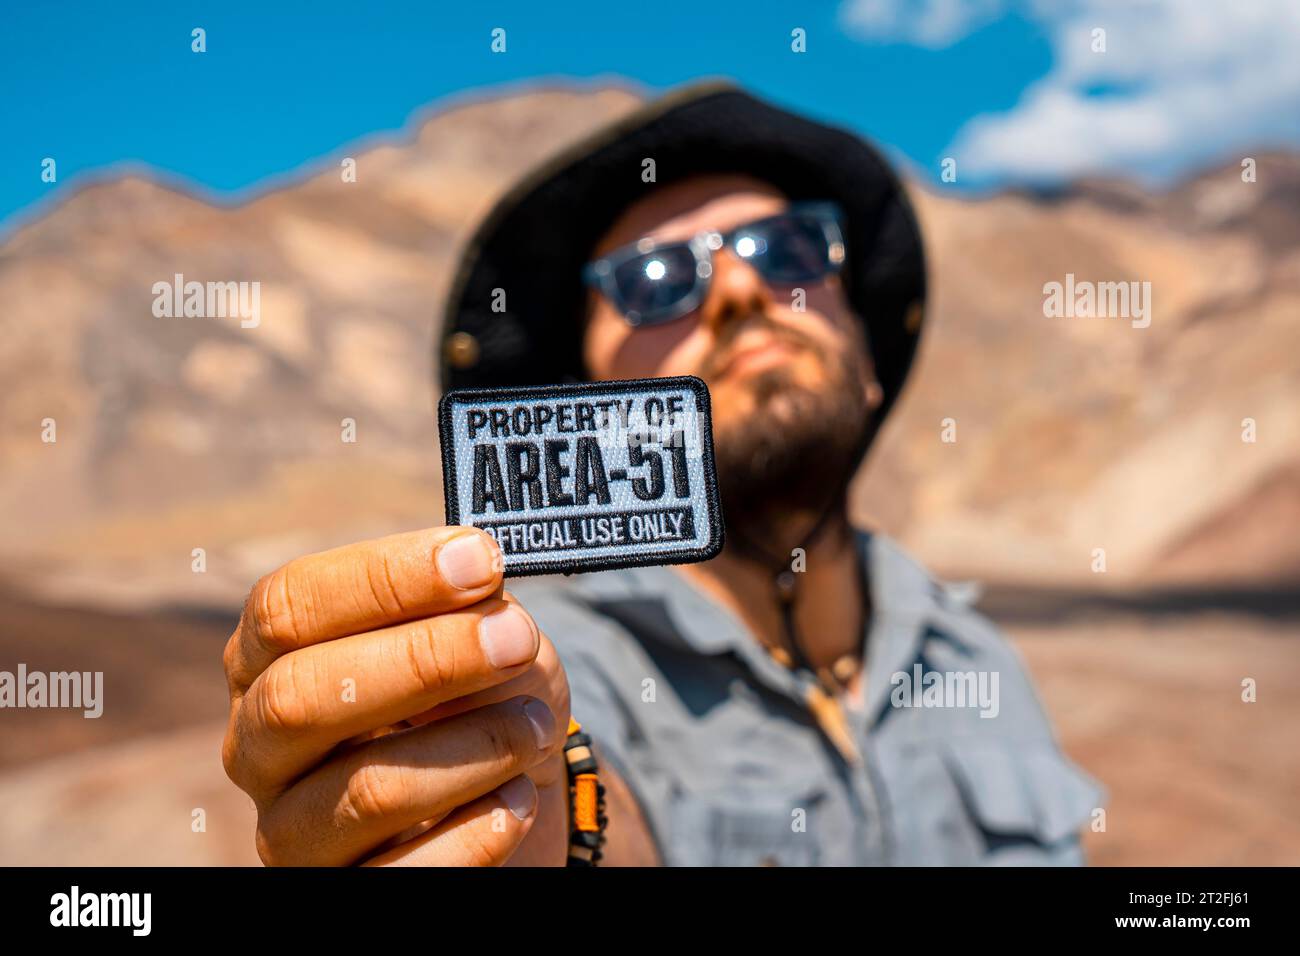 A young man with a patch for Area 51 clothing on Artist's Drive in Death Valley, California. United States Stock Photo